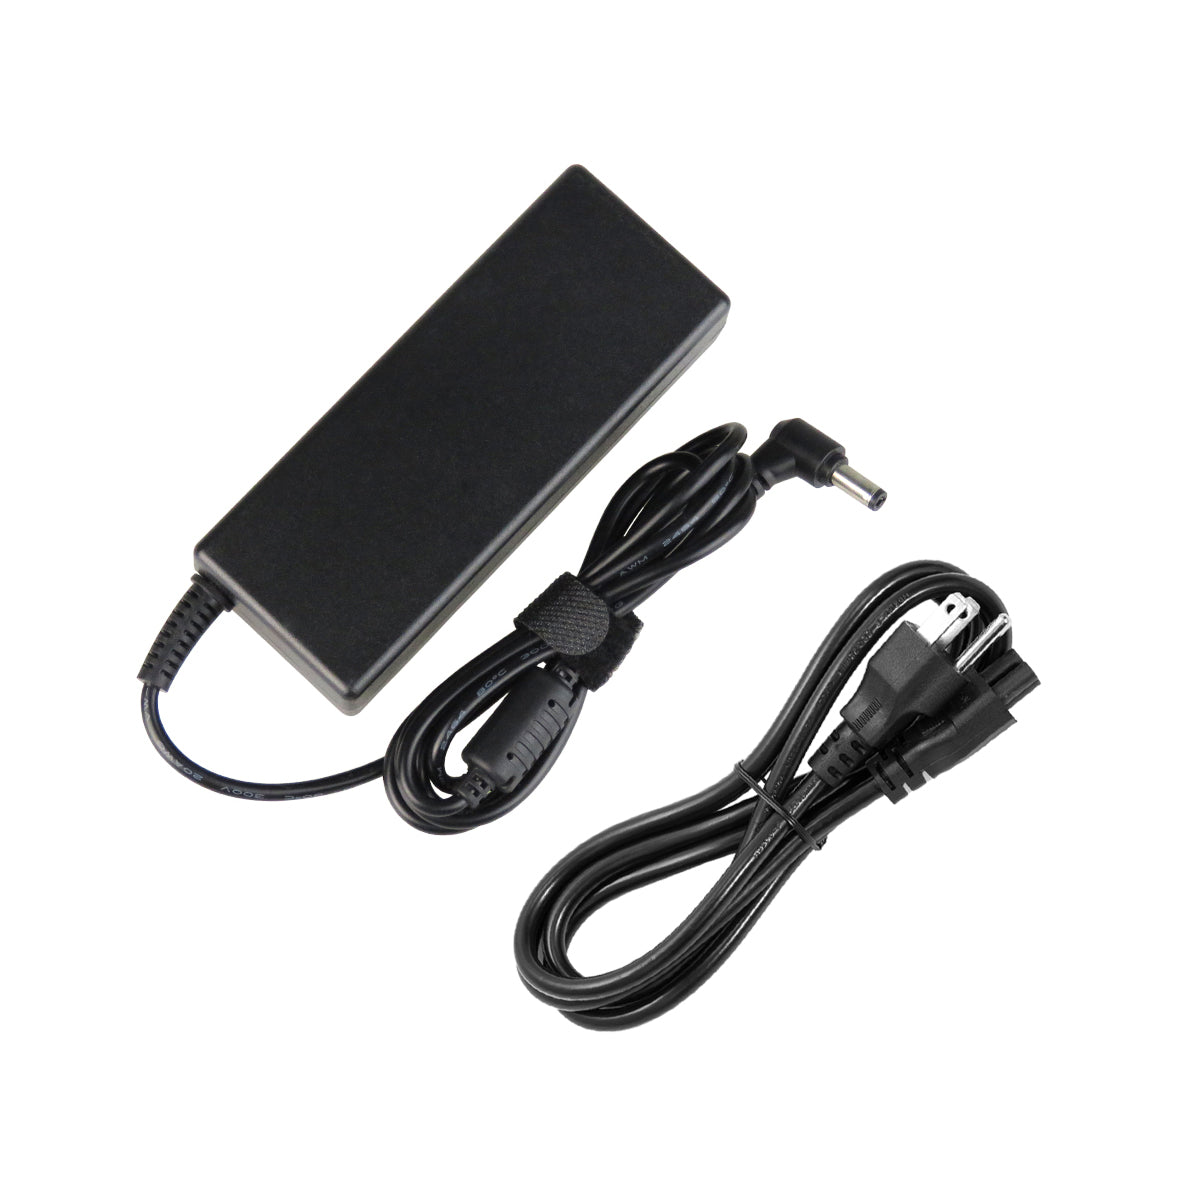 AC Adapter Charger for ASUS N43JQ Notebook.